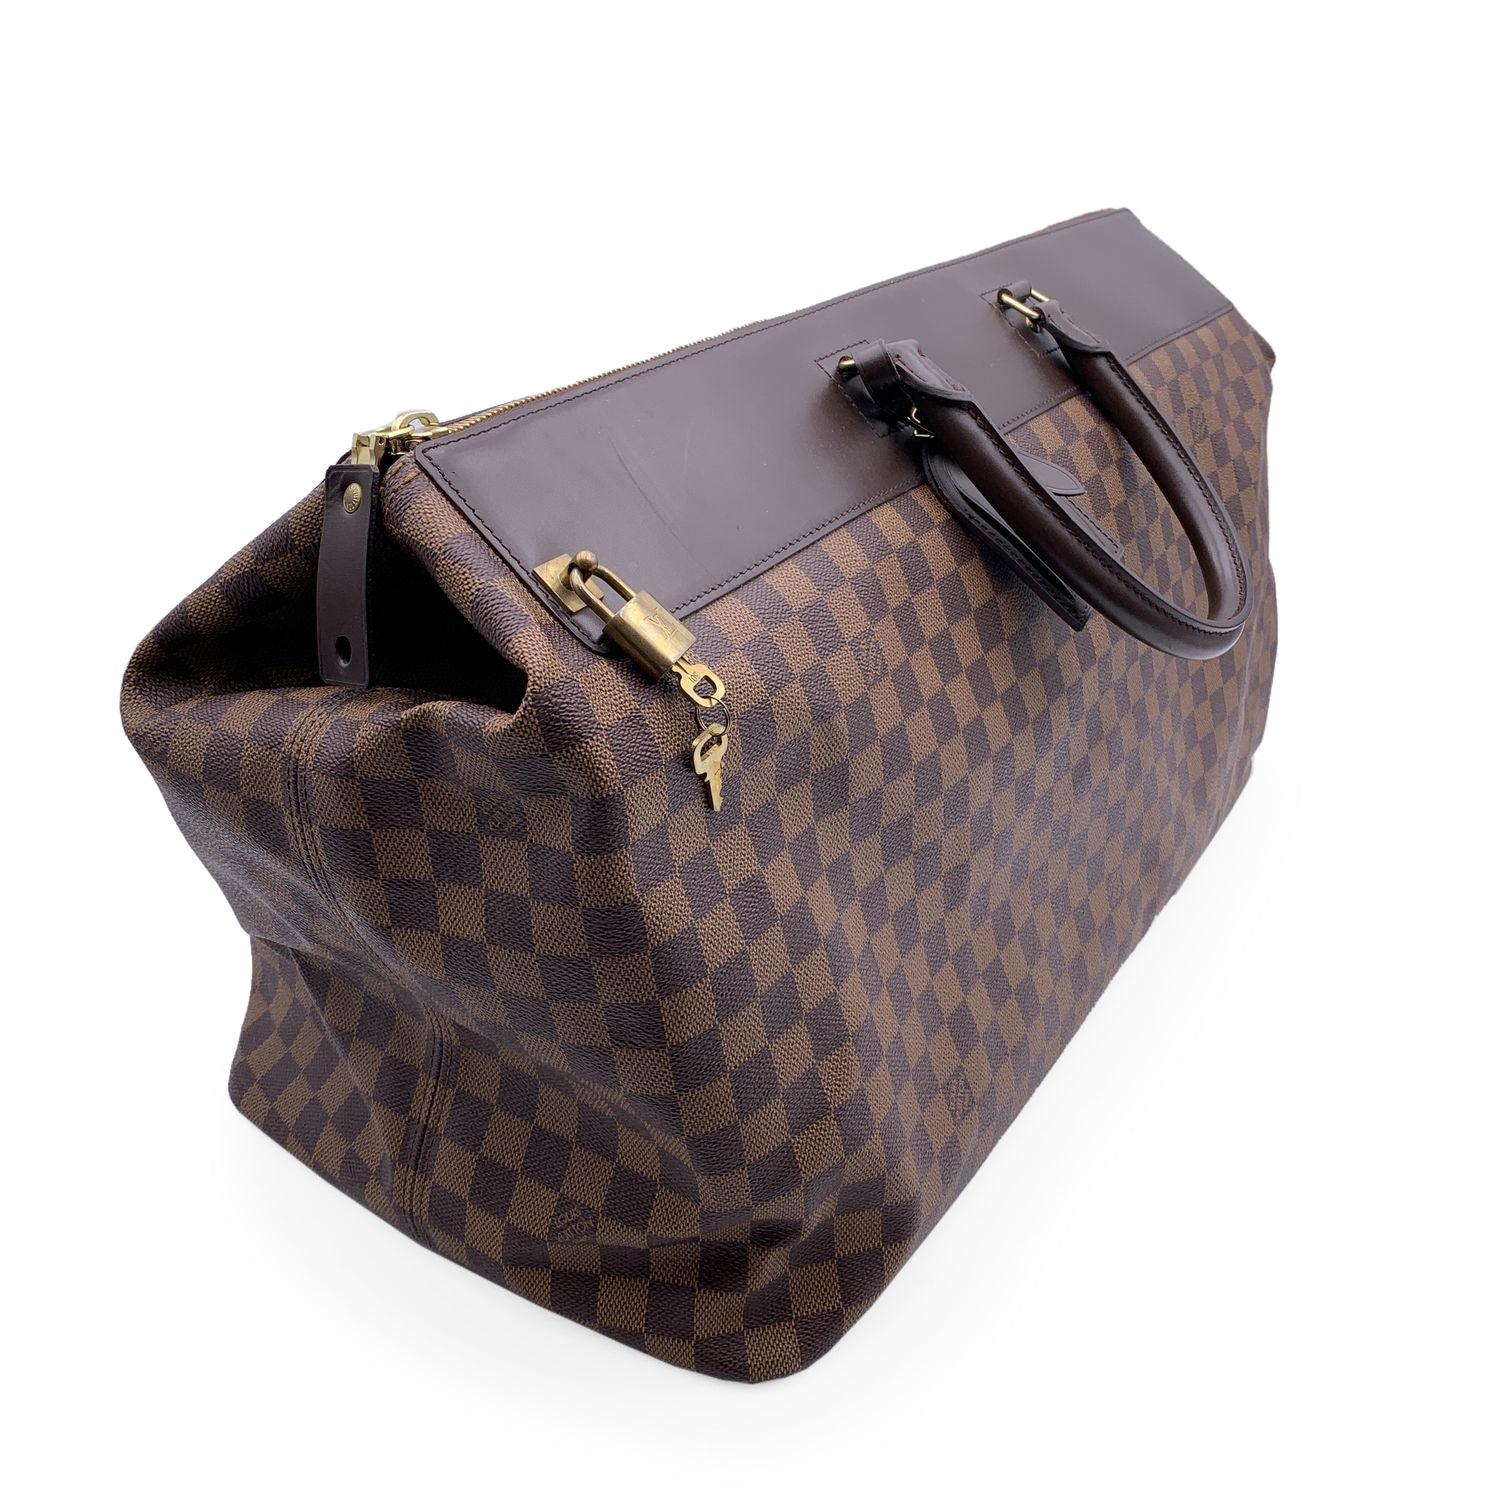 This beautiful Bag will come with a Certificate of Authenticity provided by Entrupy. The certificate will be provided at no further cost. Louis Vuitton 'Greenwich GM' Travel bag. Damier Ebene canvas and brown leather trim. Upper zip closure (with